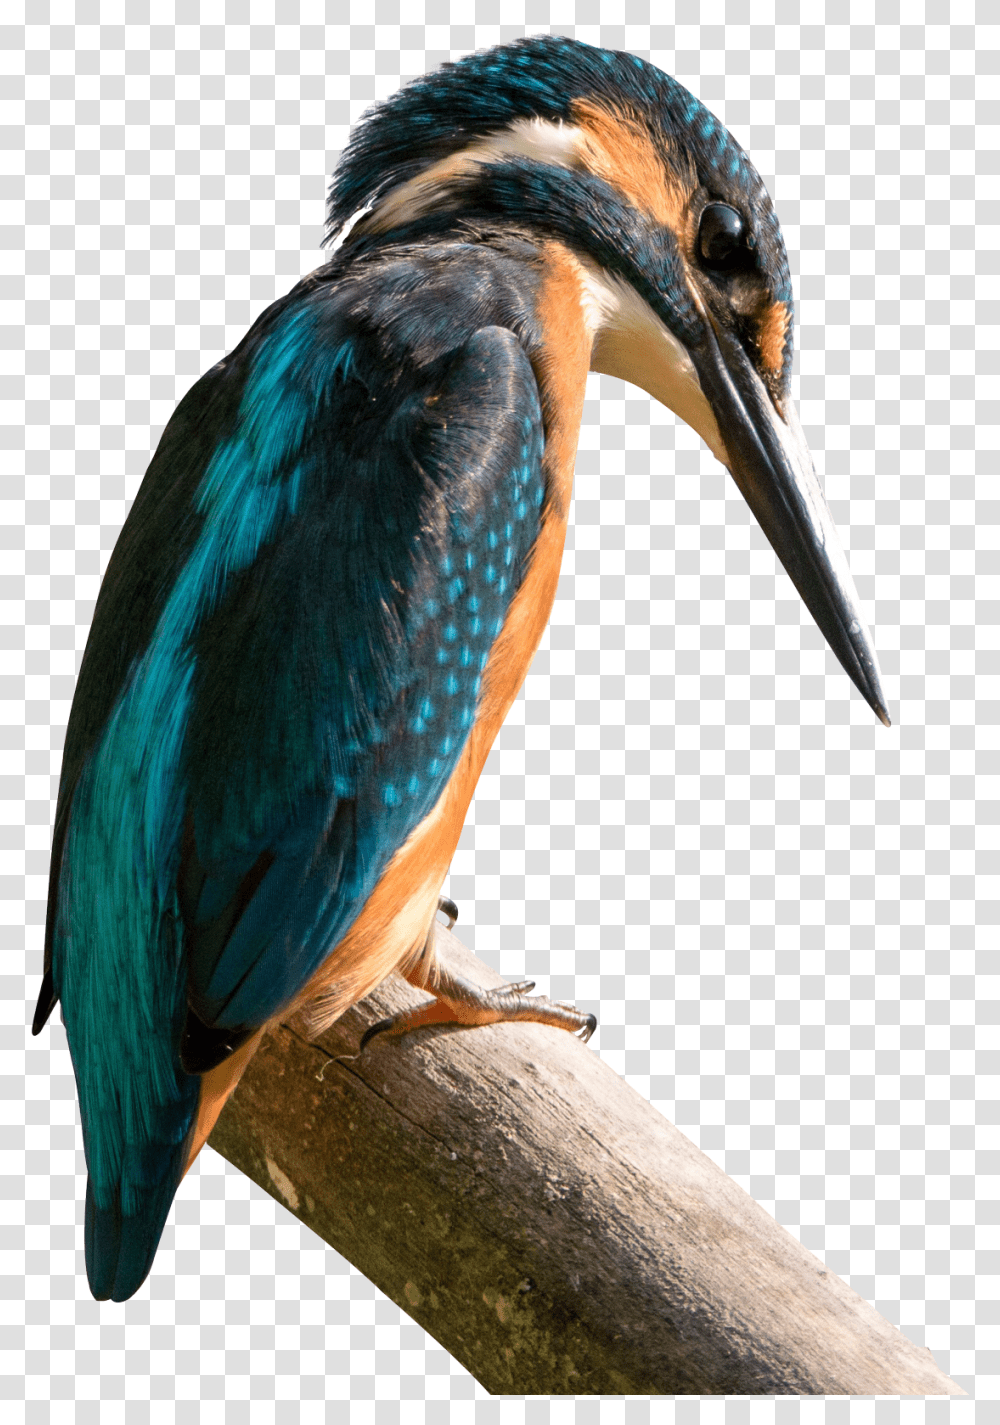 Kingfisher Bird Image Pngpix Birds Found In Hilly Region Of Nepal, Animal, Jay, Bluebird, Blue Jay Transparent Png